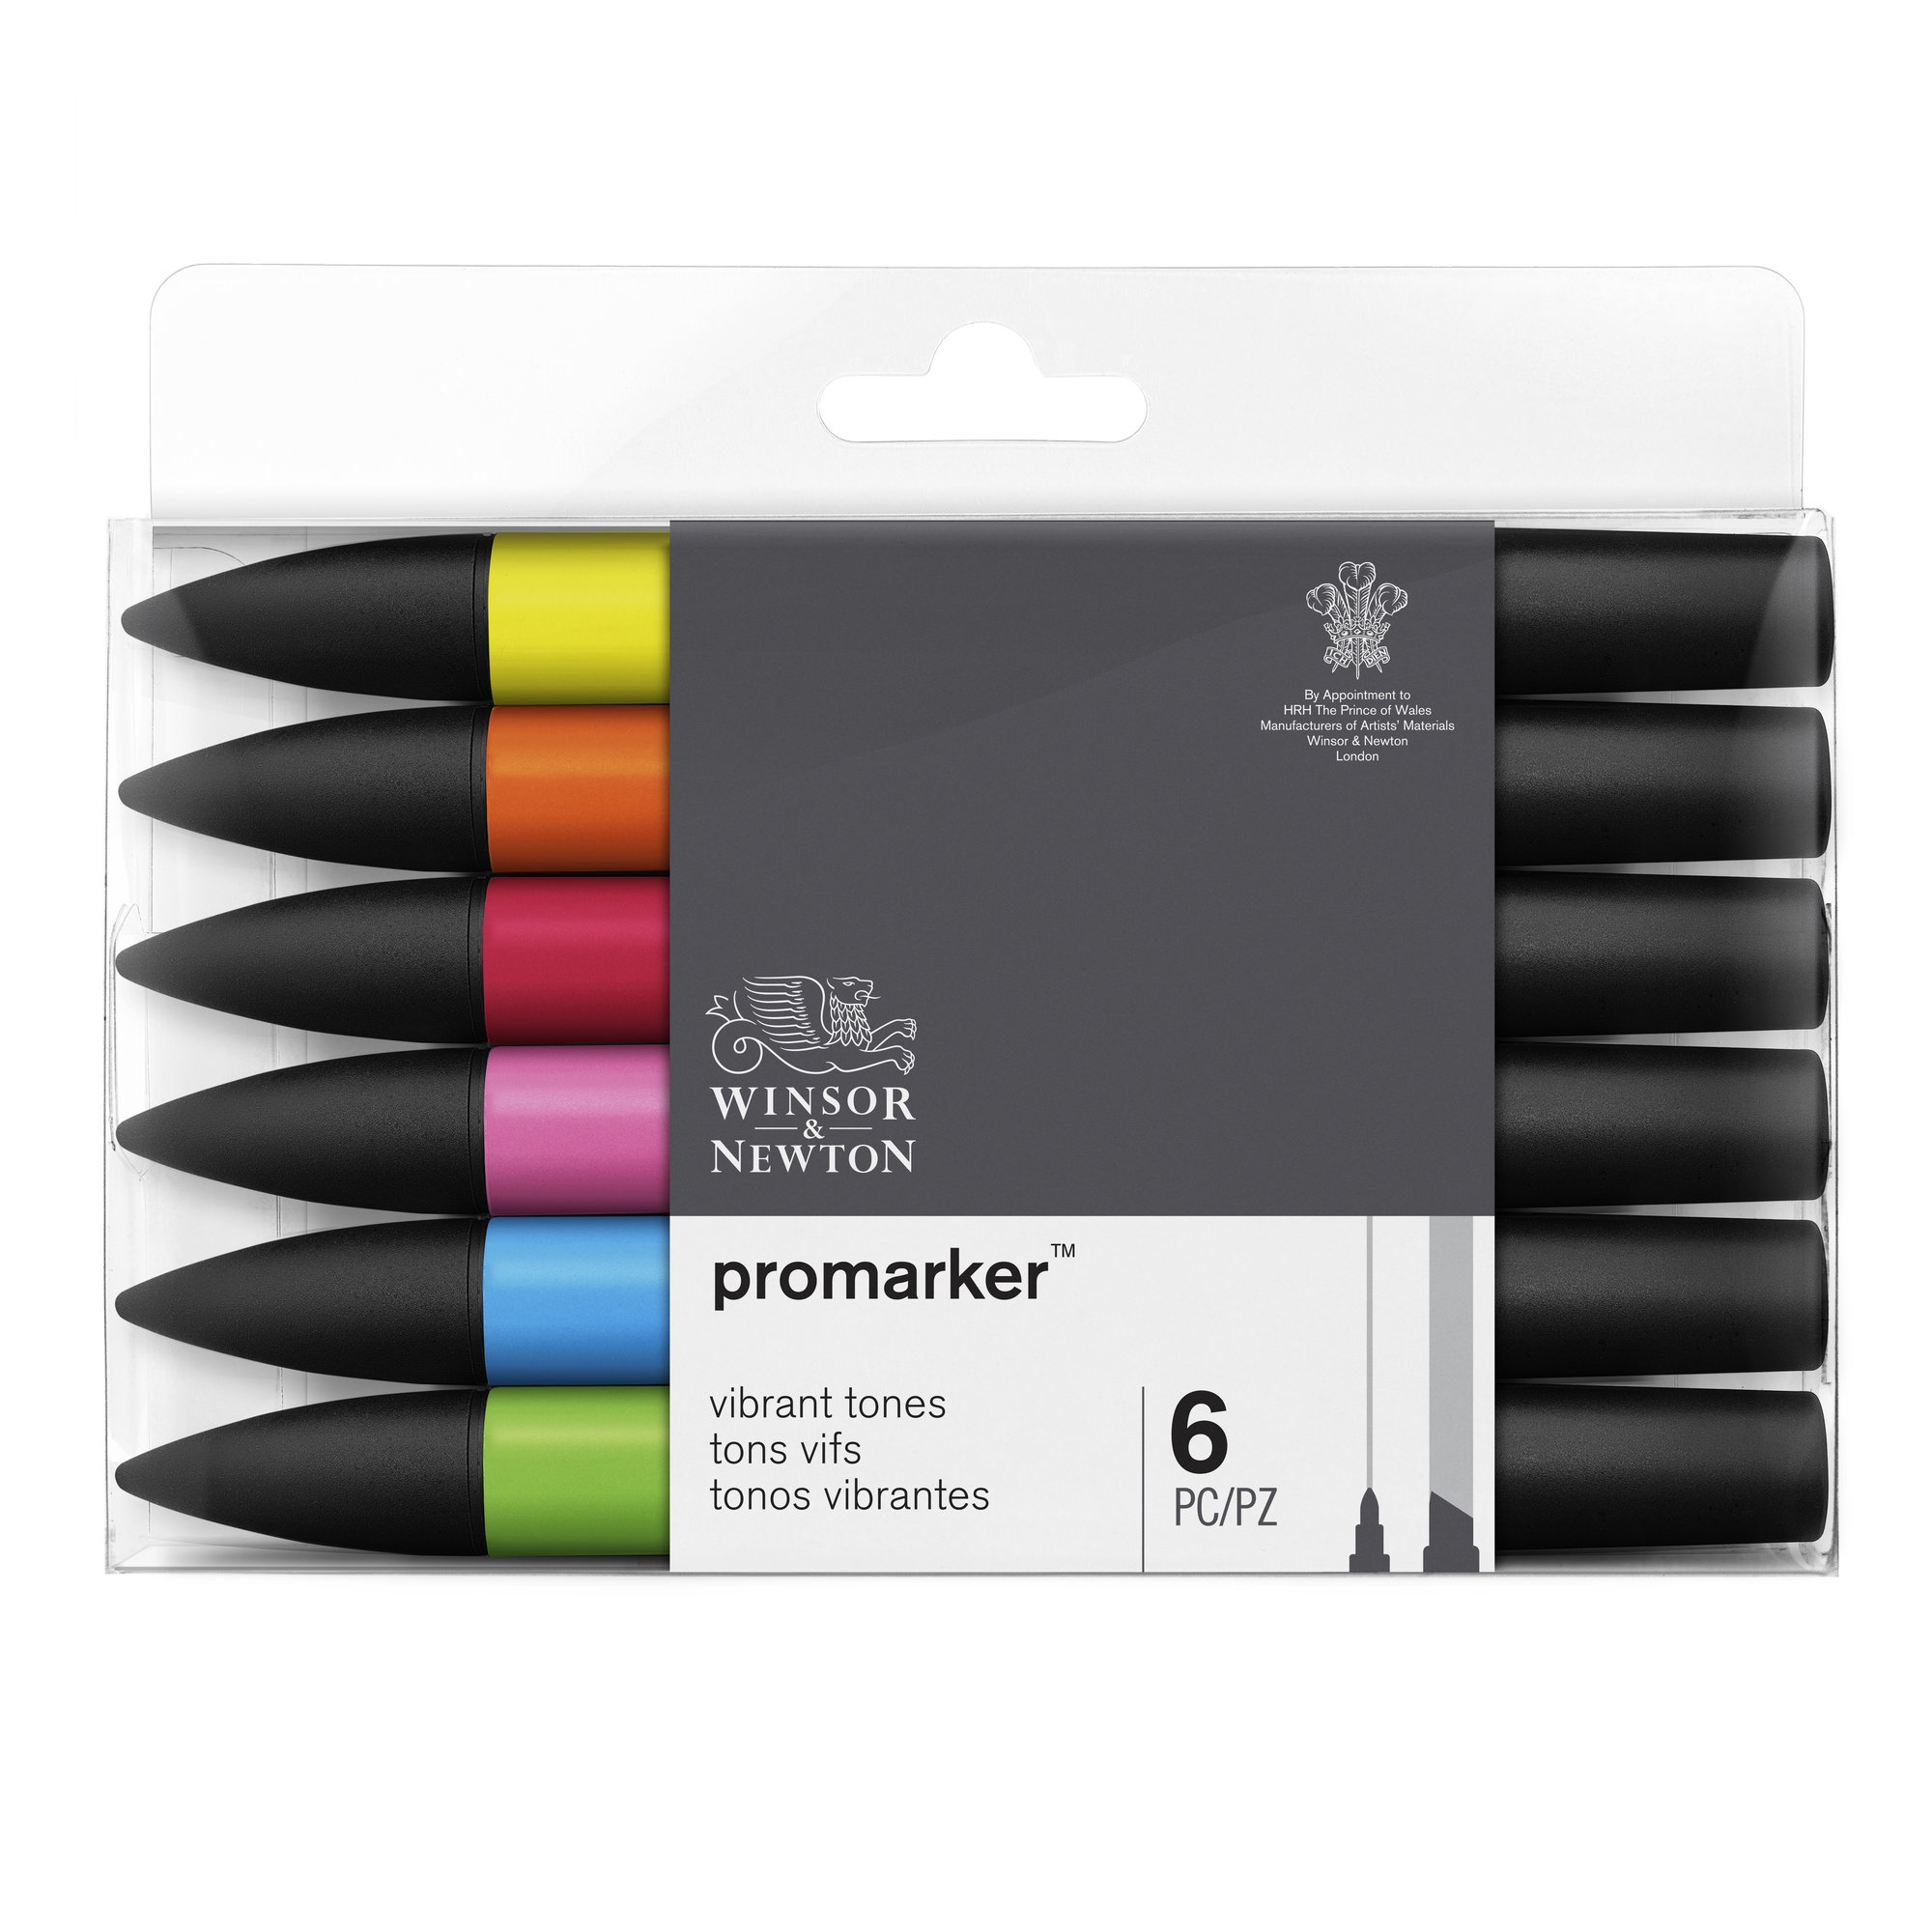 Winsor & Newton Promarker Graphic Drawing Pens Vibrant Tones Set of 6 Markers